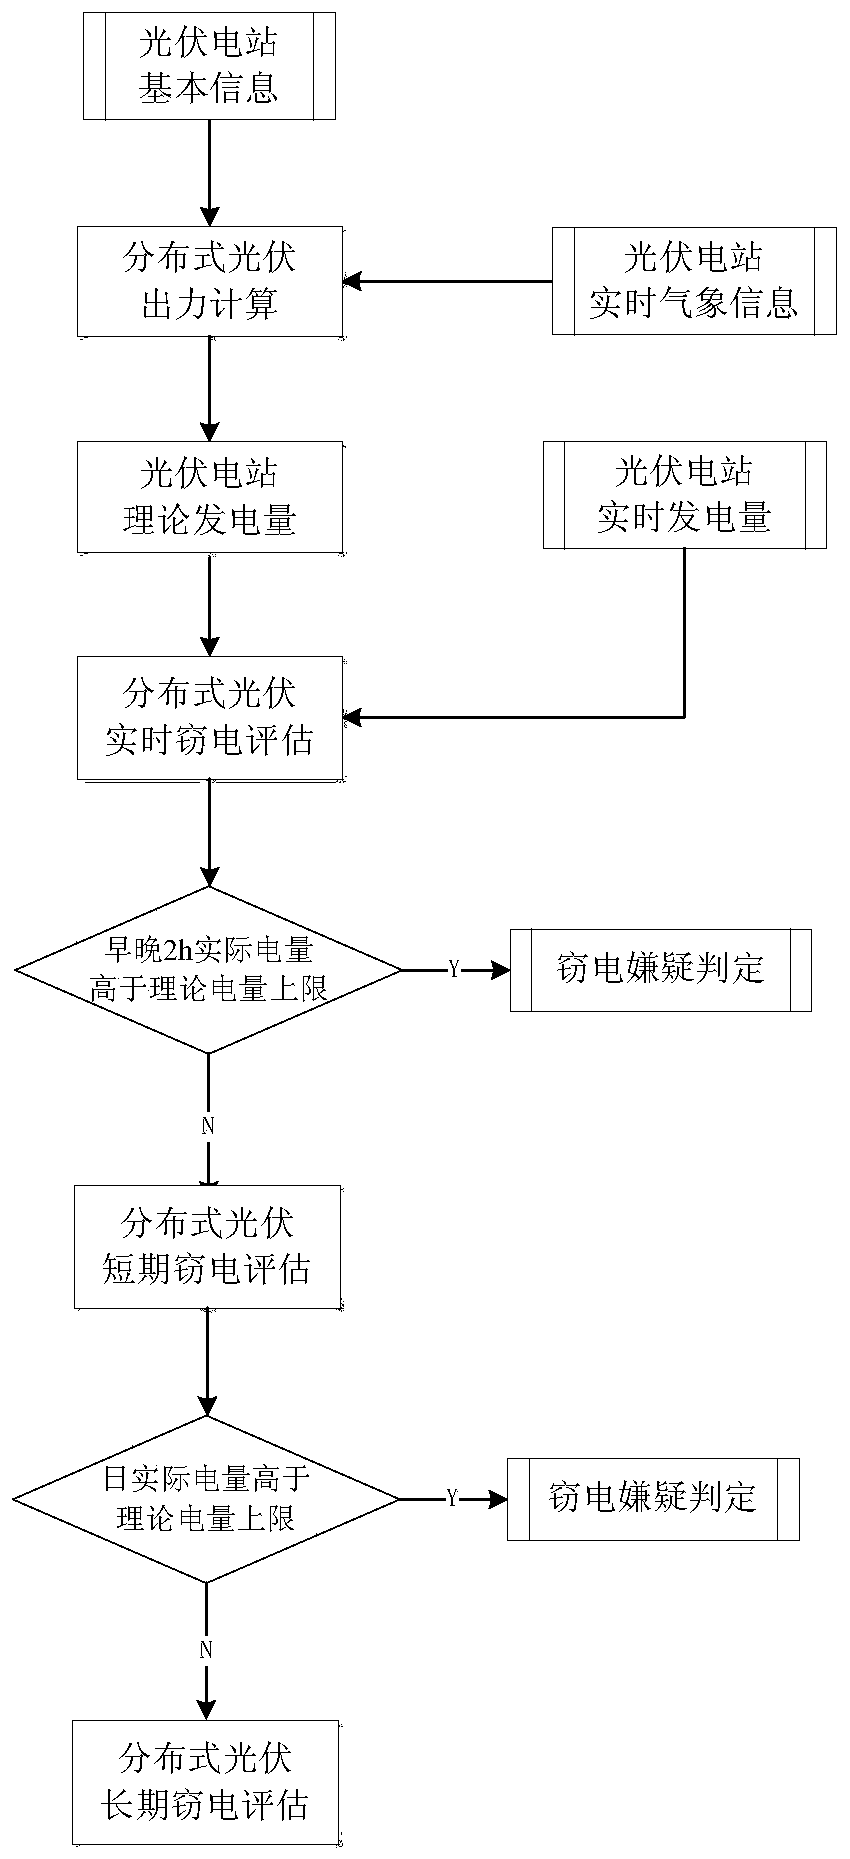 Regional distributed photovoltaic power theft supervision system